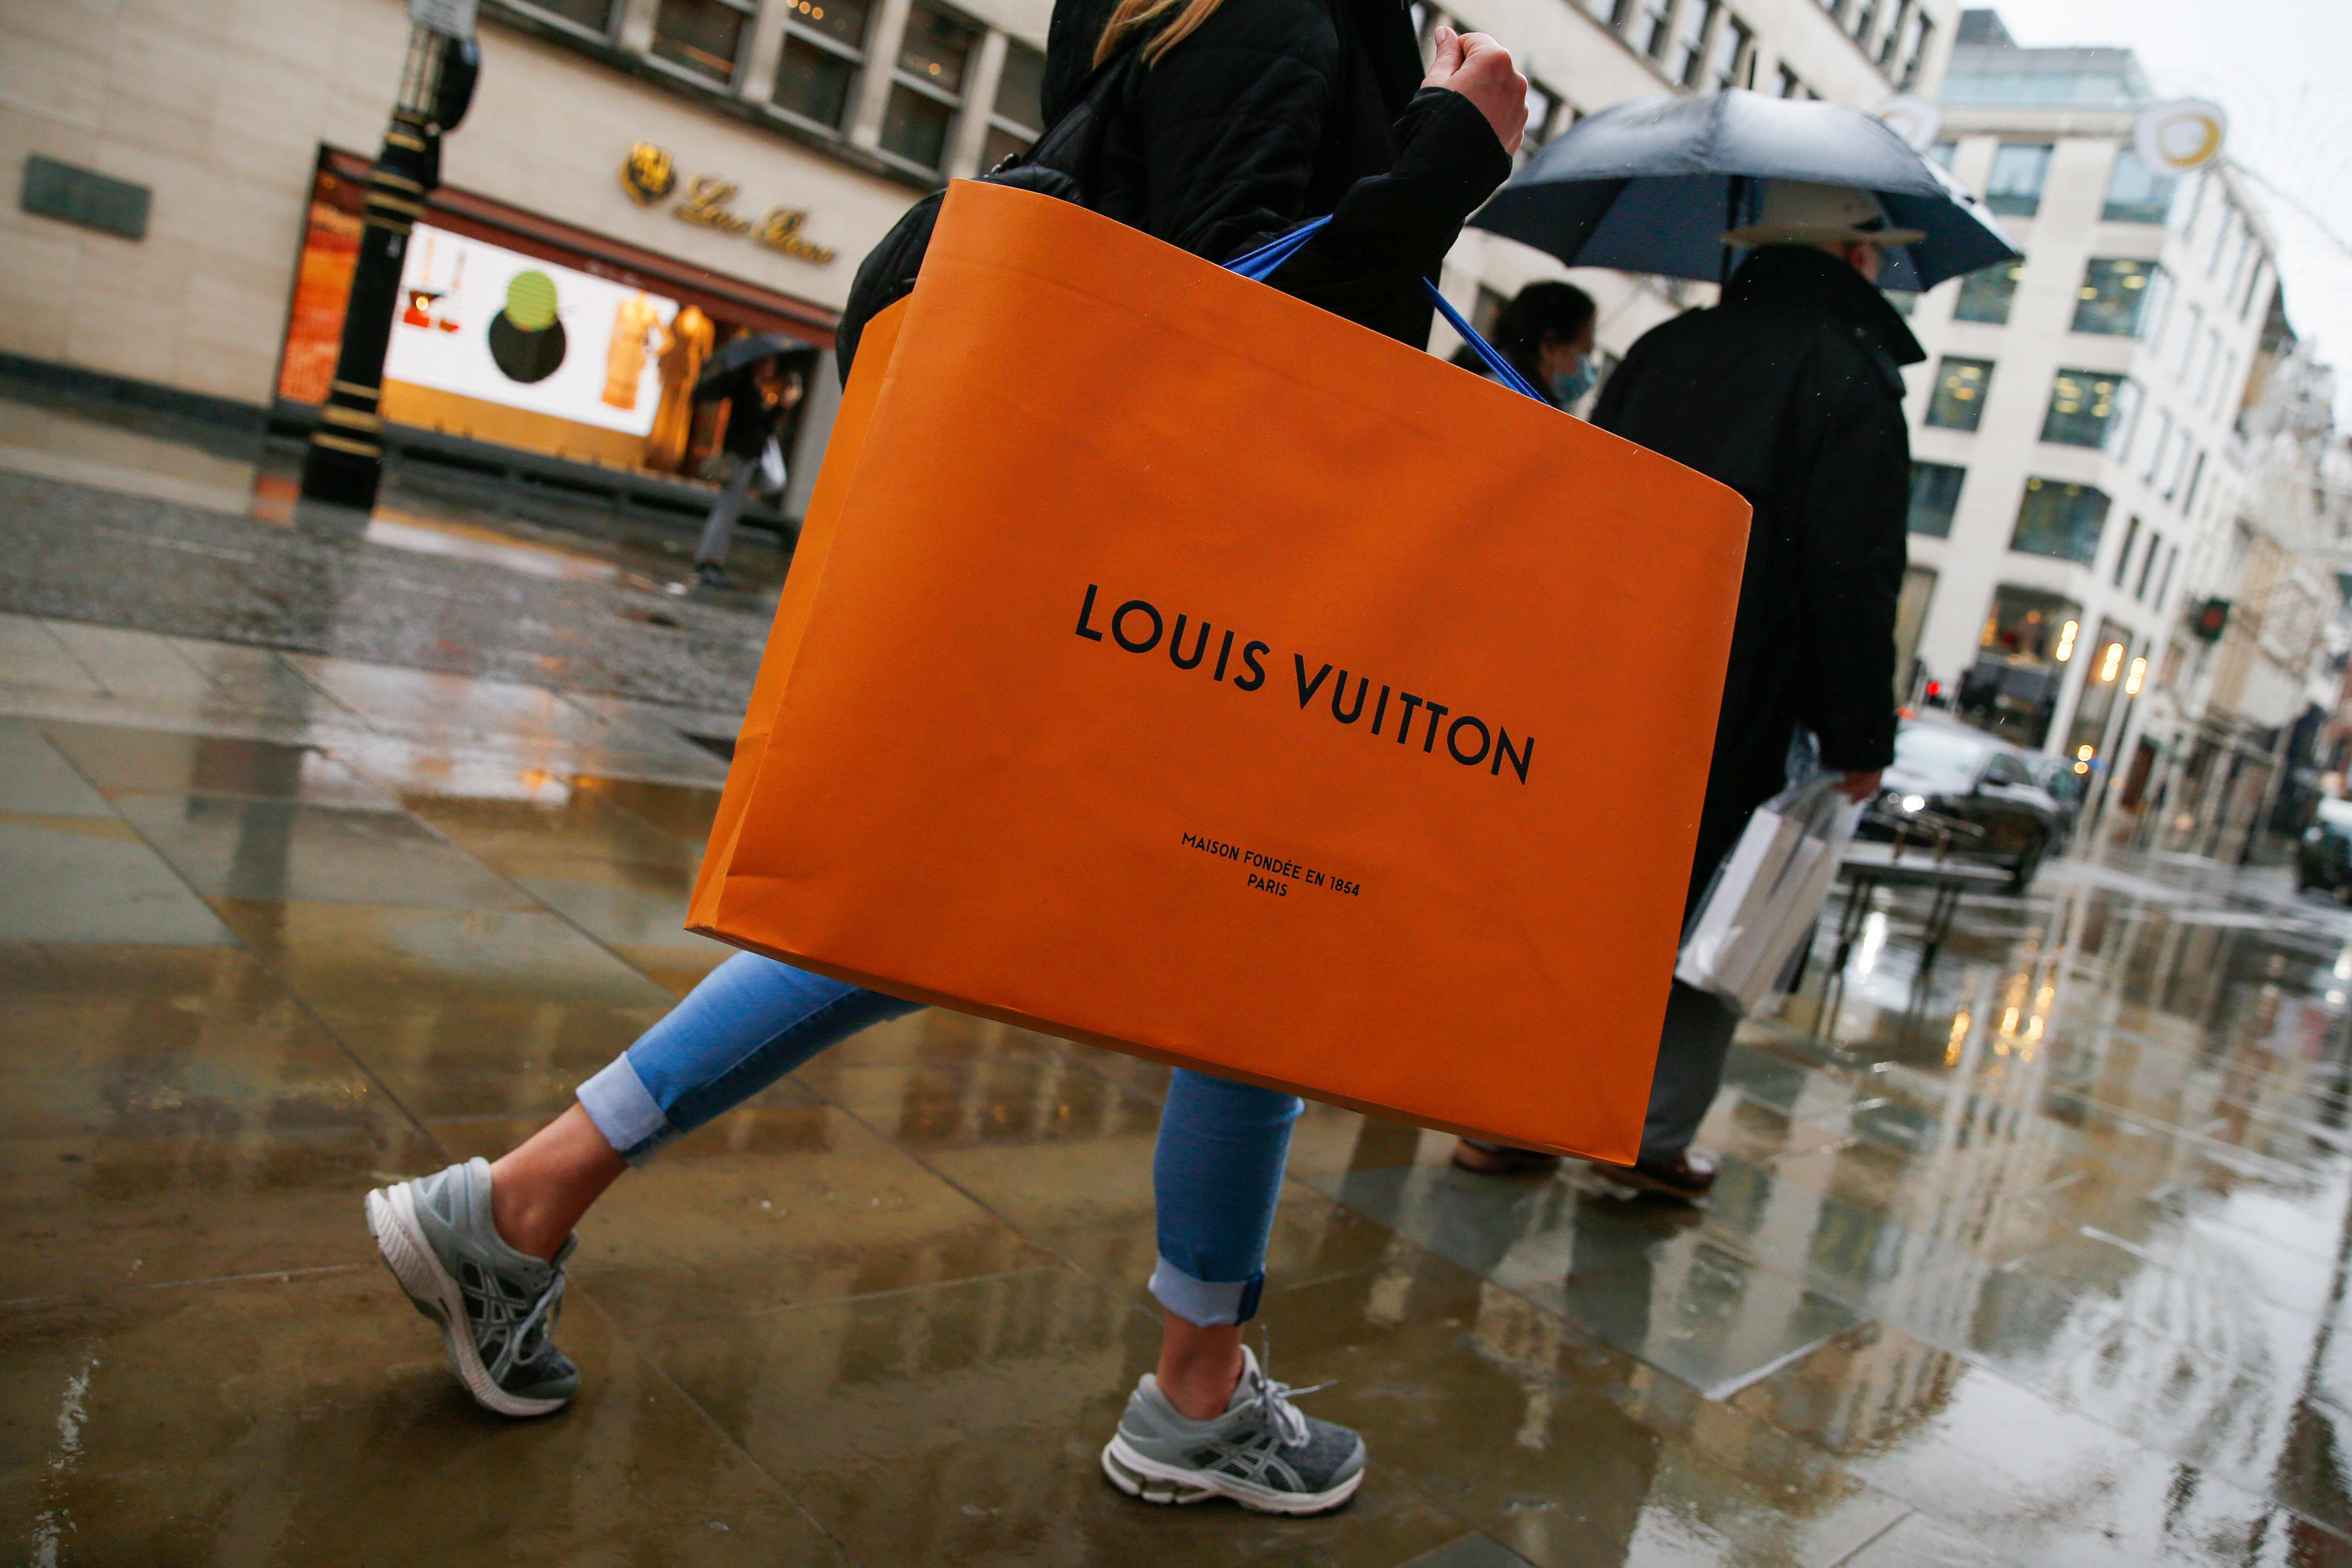 Morgan Stanley names the stocks to watch as luxury brands enter the metaverse